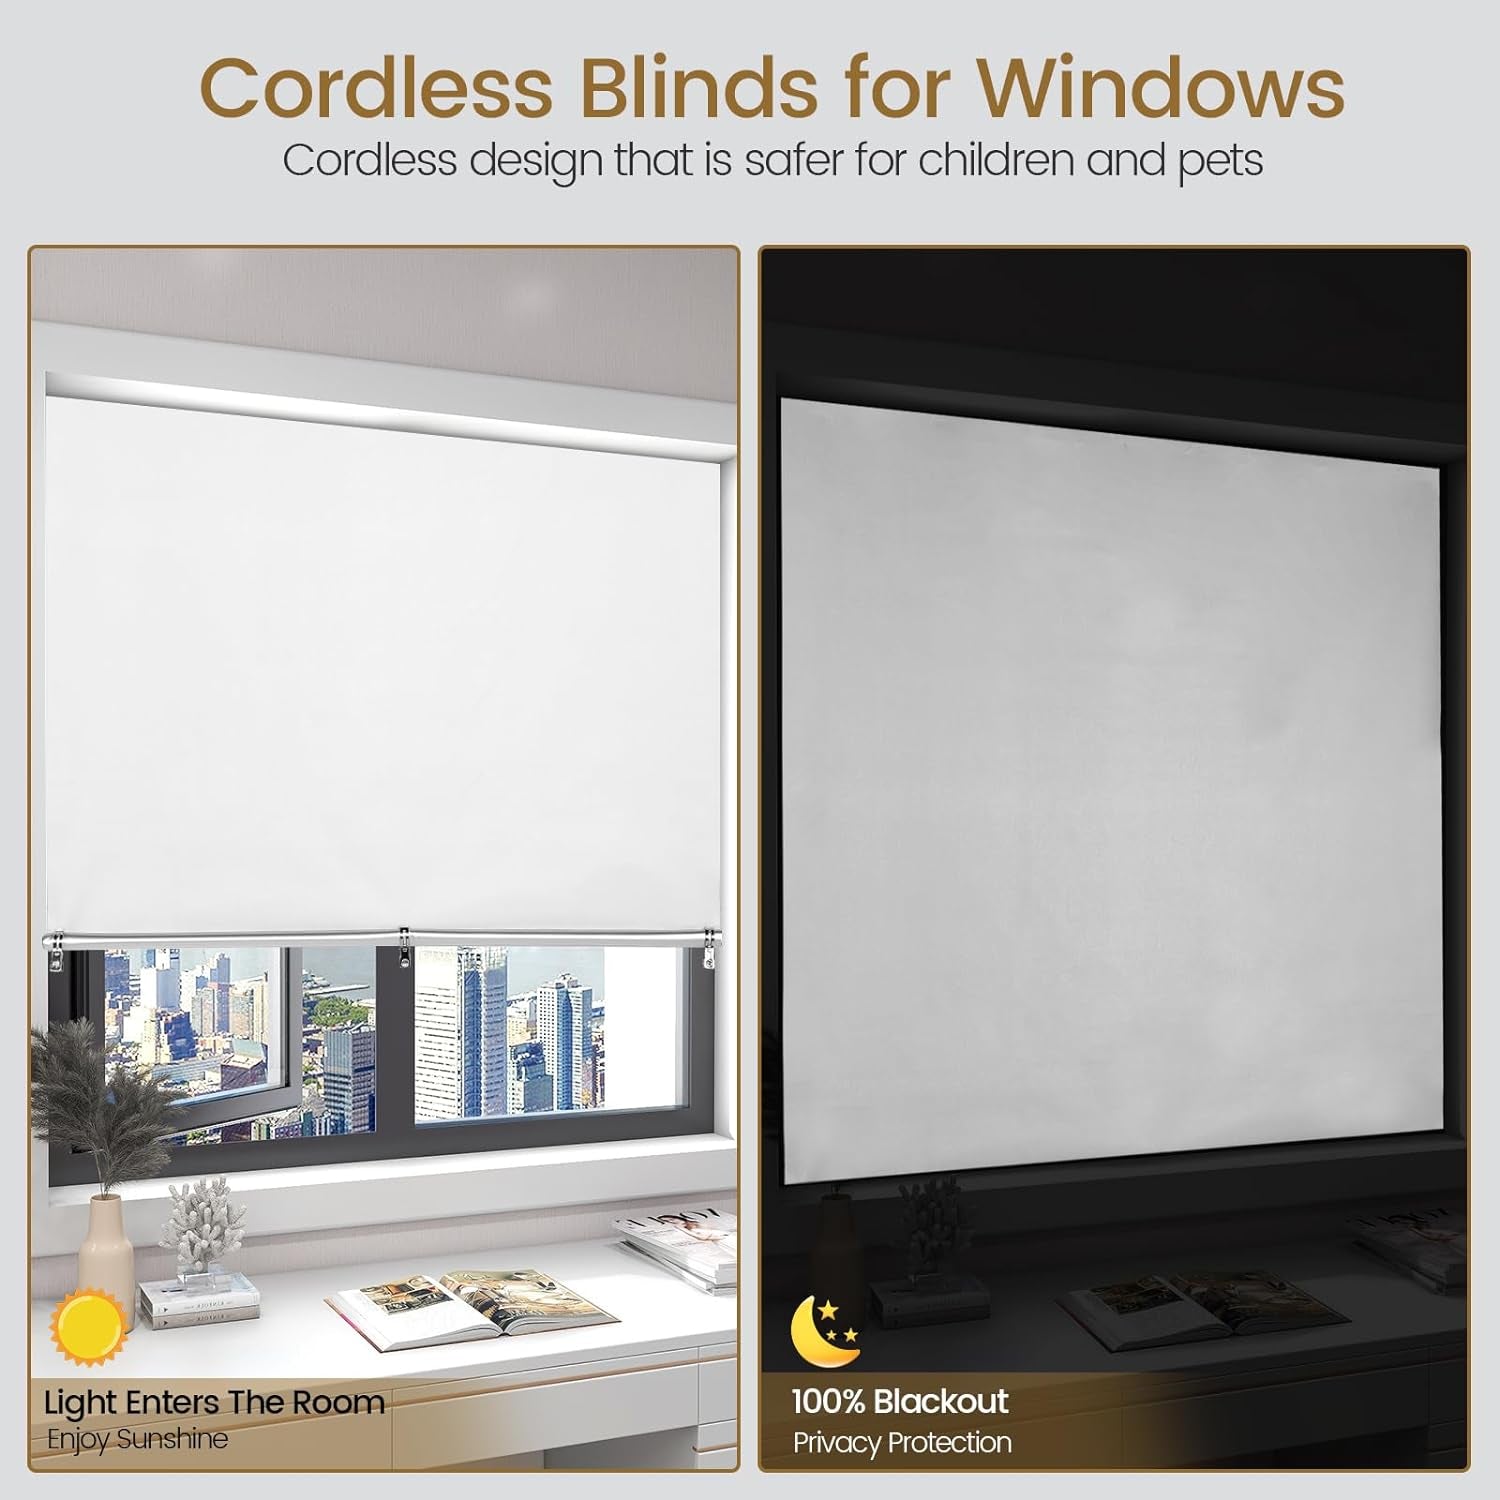 Blinds for Windows, 100% Blackout Roller Shades, 36"X 72" Cordless Window Blinds with Tapes No Drill Travel Blackout Blinds Window Curtains for Bedroom Nursery Dorm Room Windows